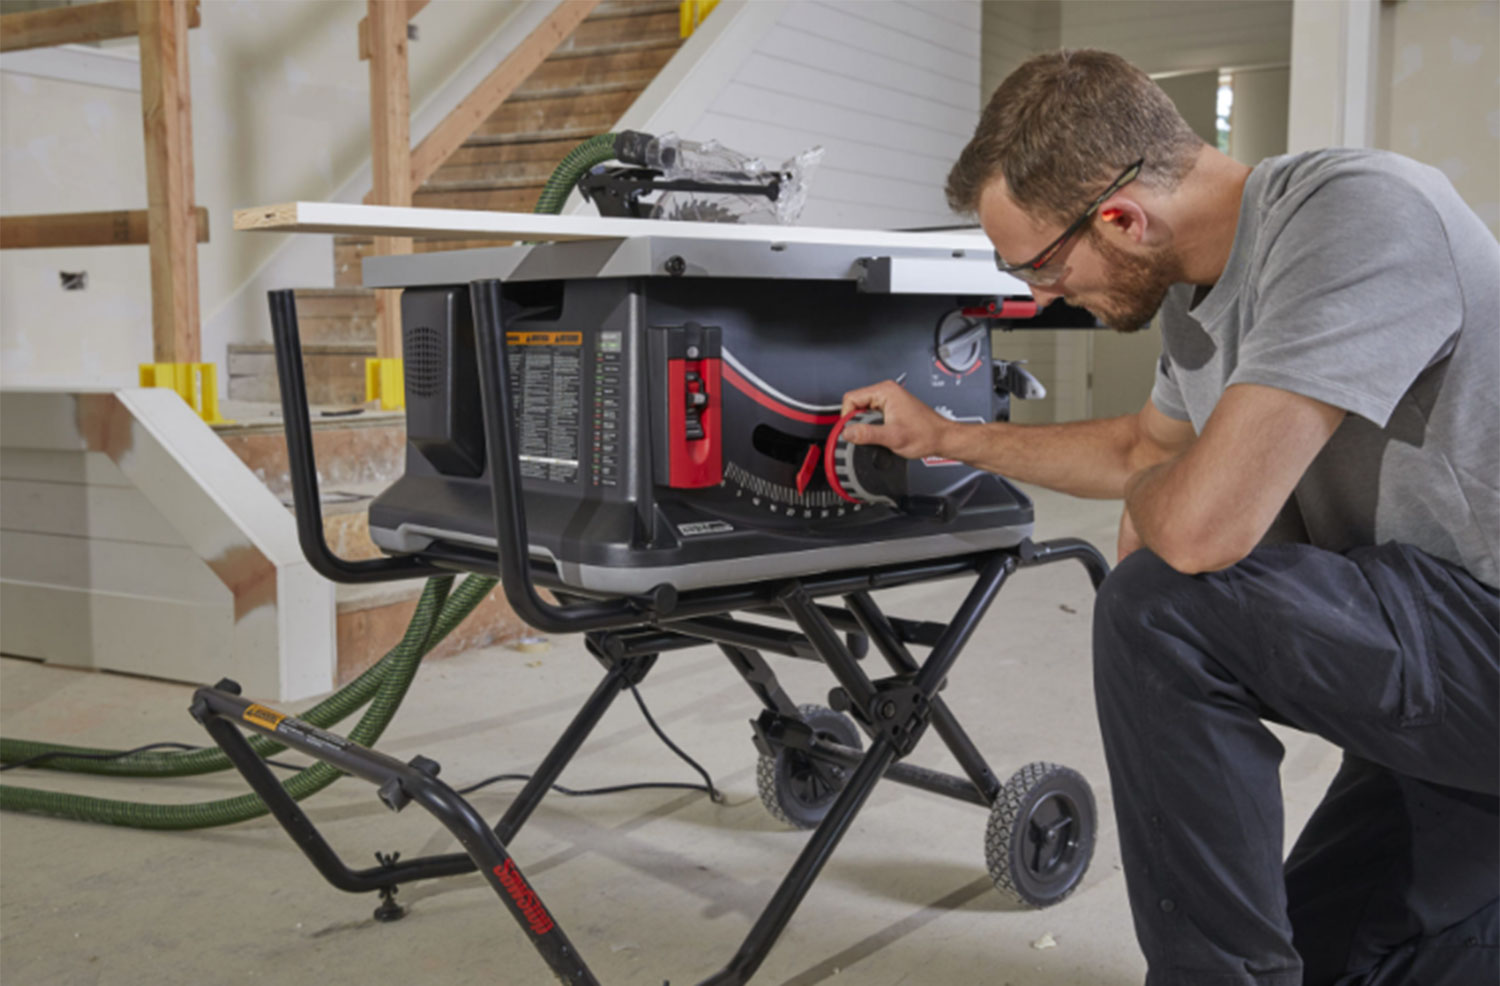 The Sawstop jobsite table saw.